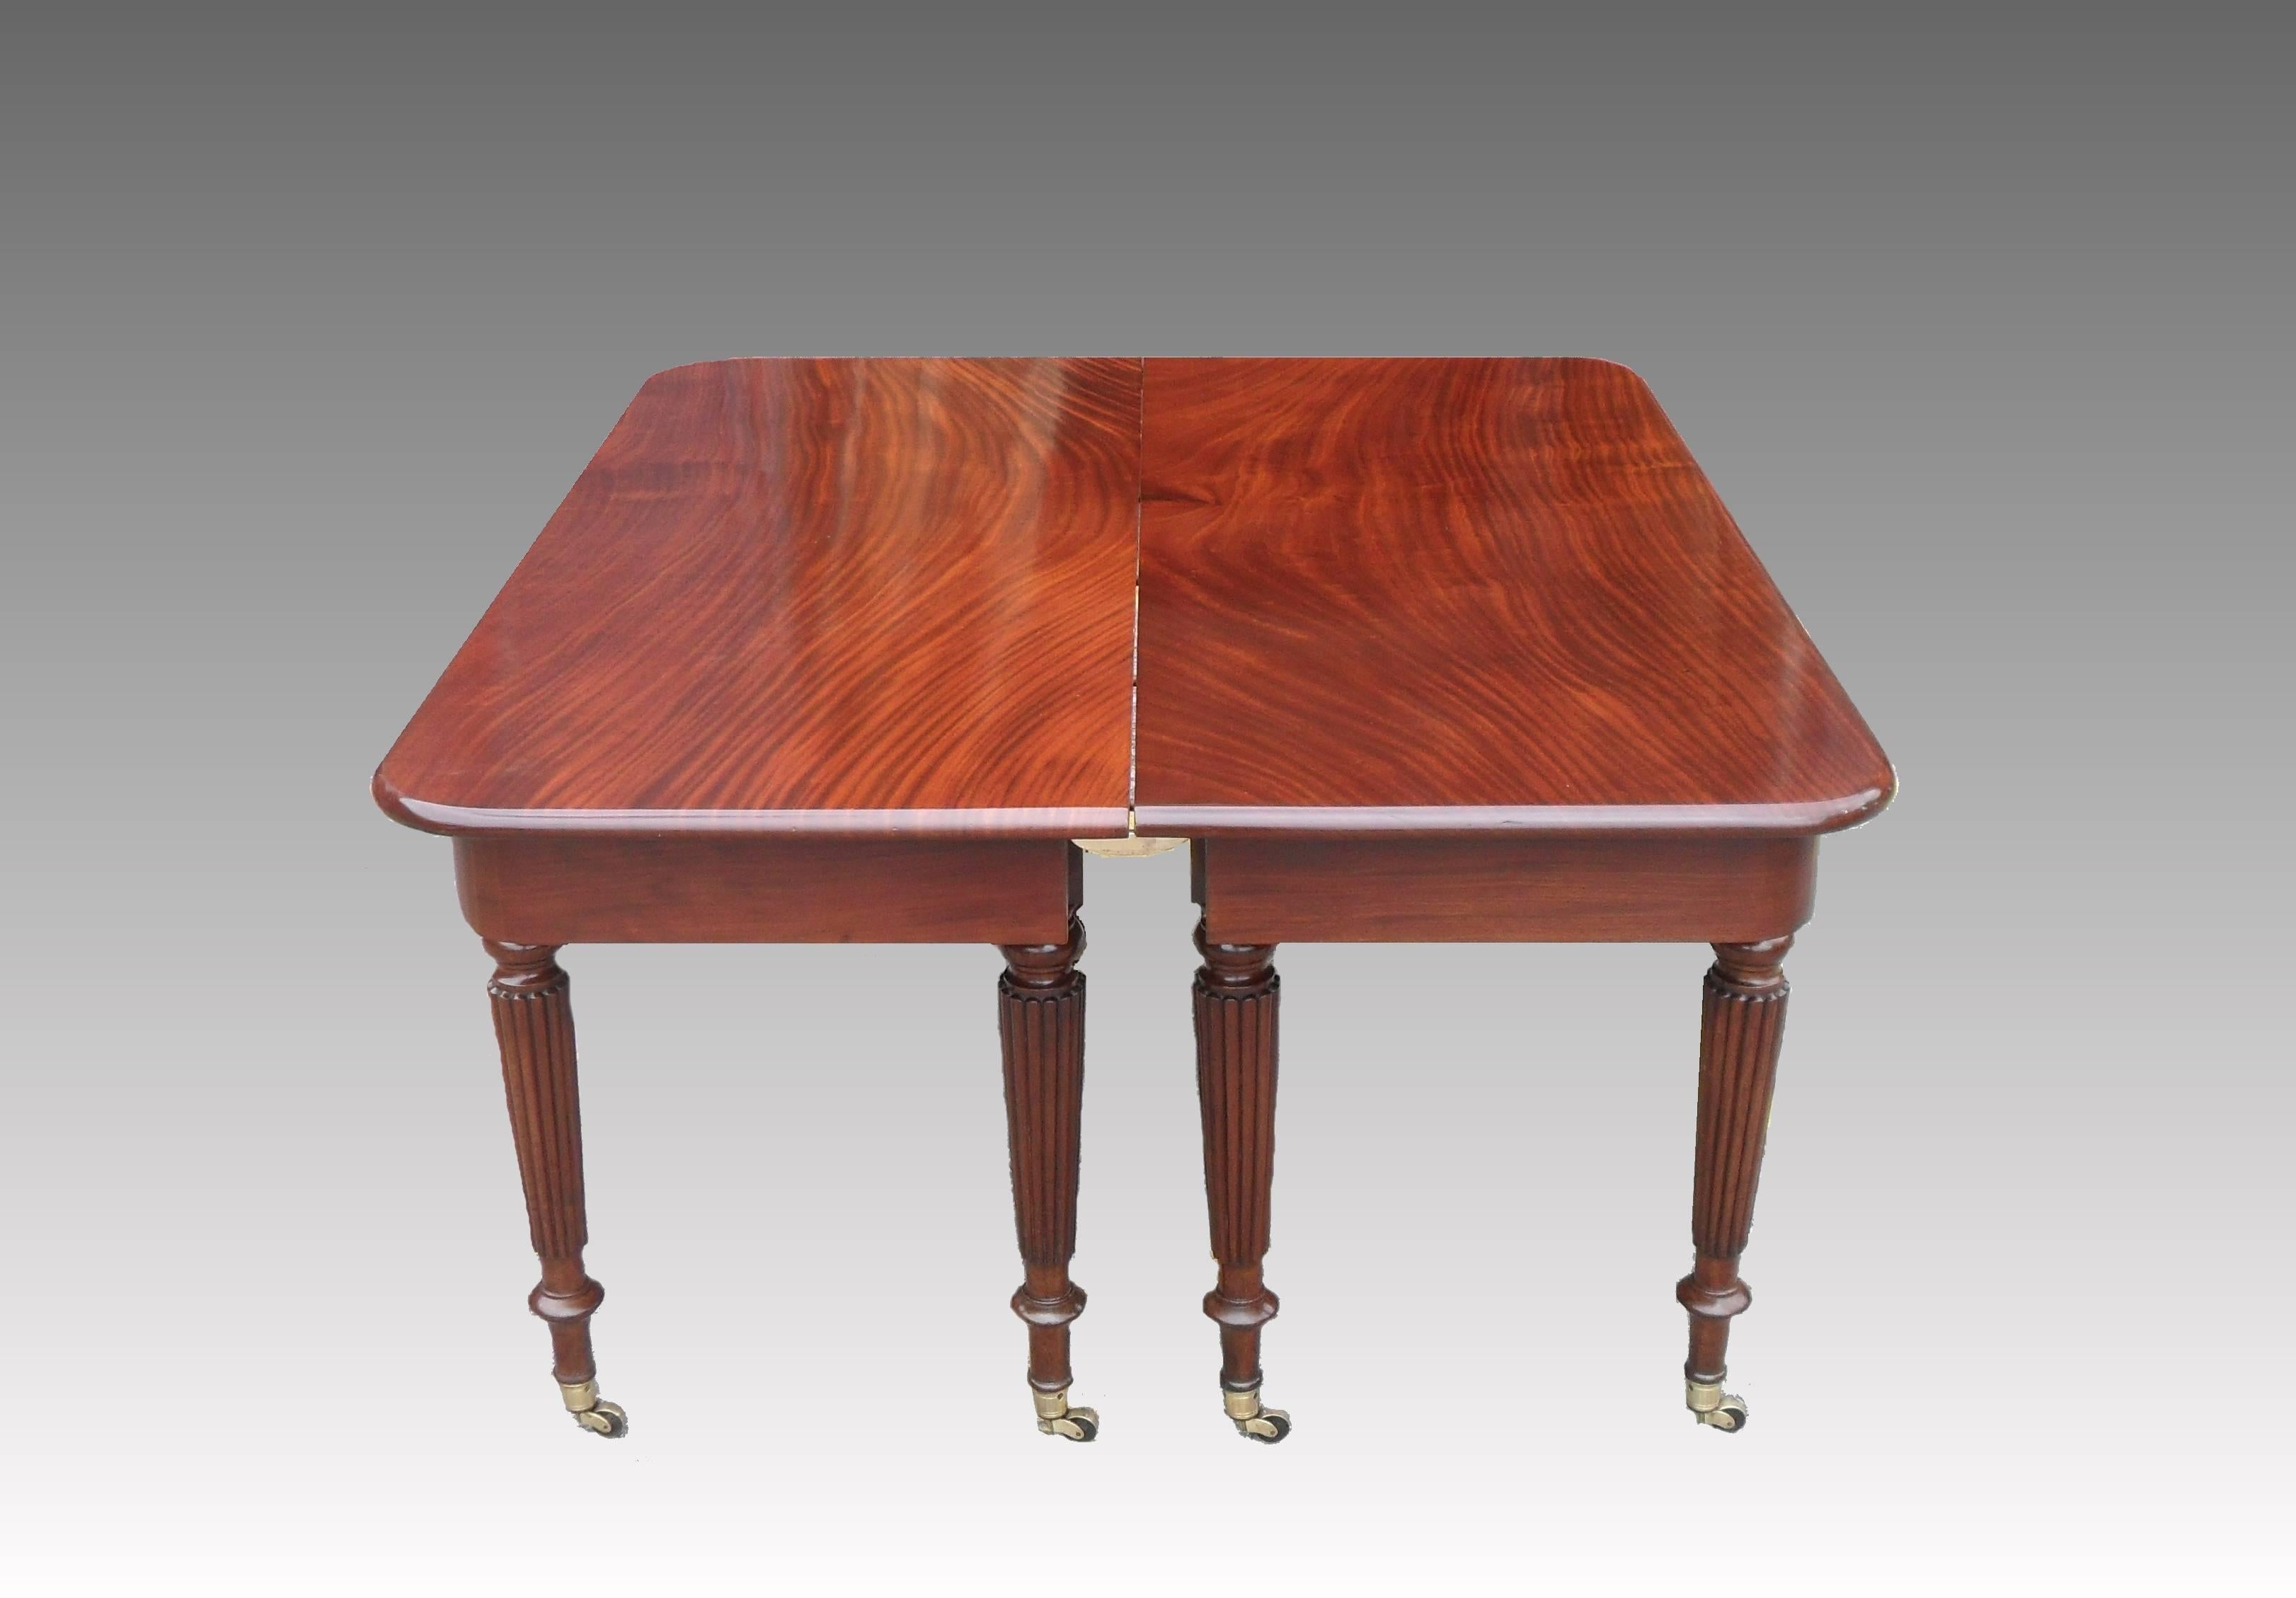 English George iv Figured Mahogany Extending Dining Table Attributed to Gillows For Sale 1